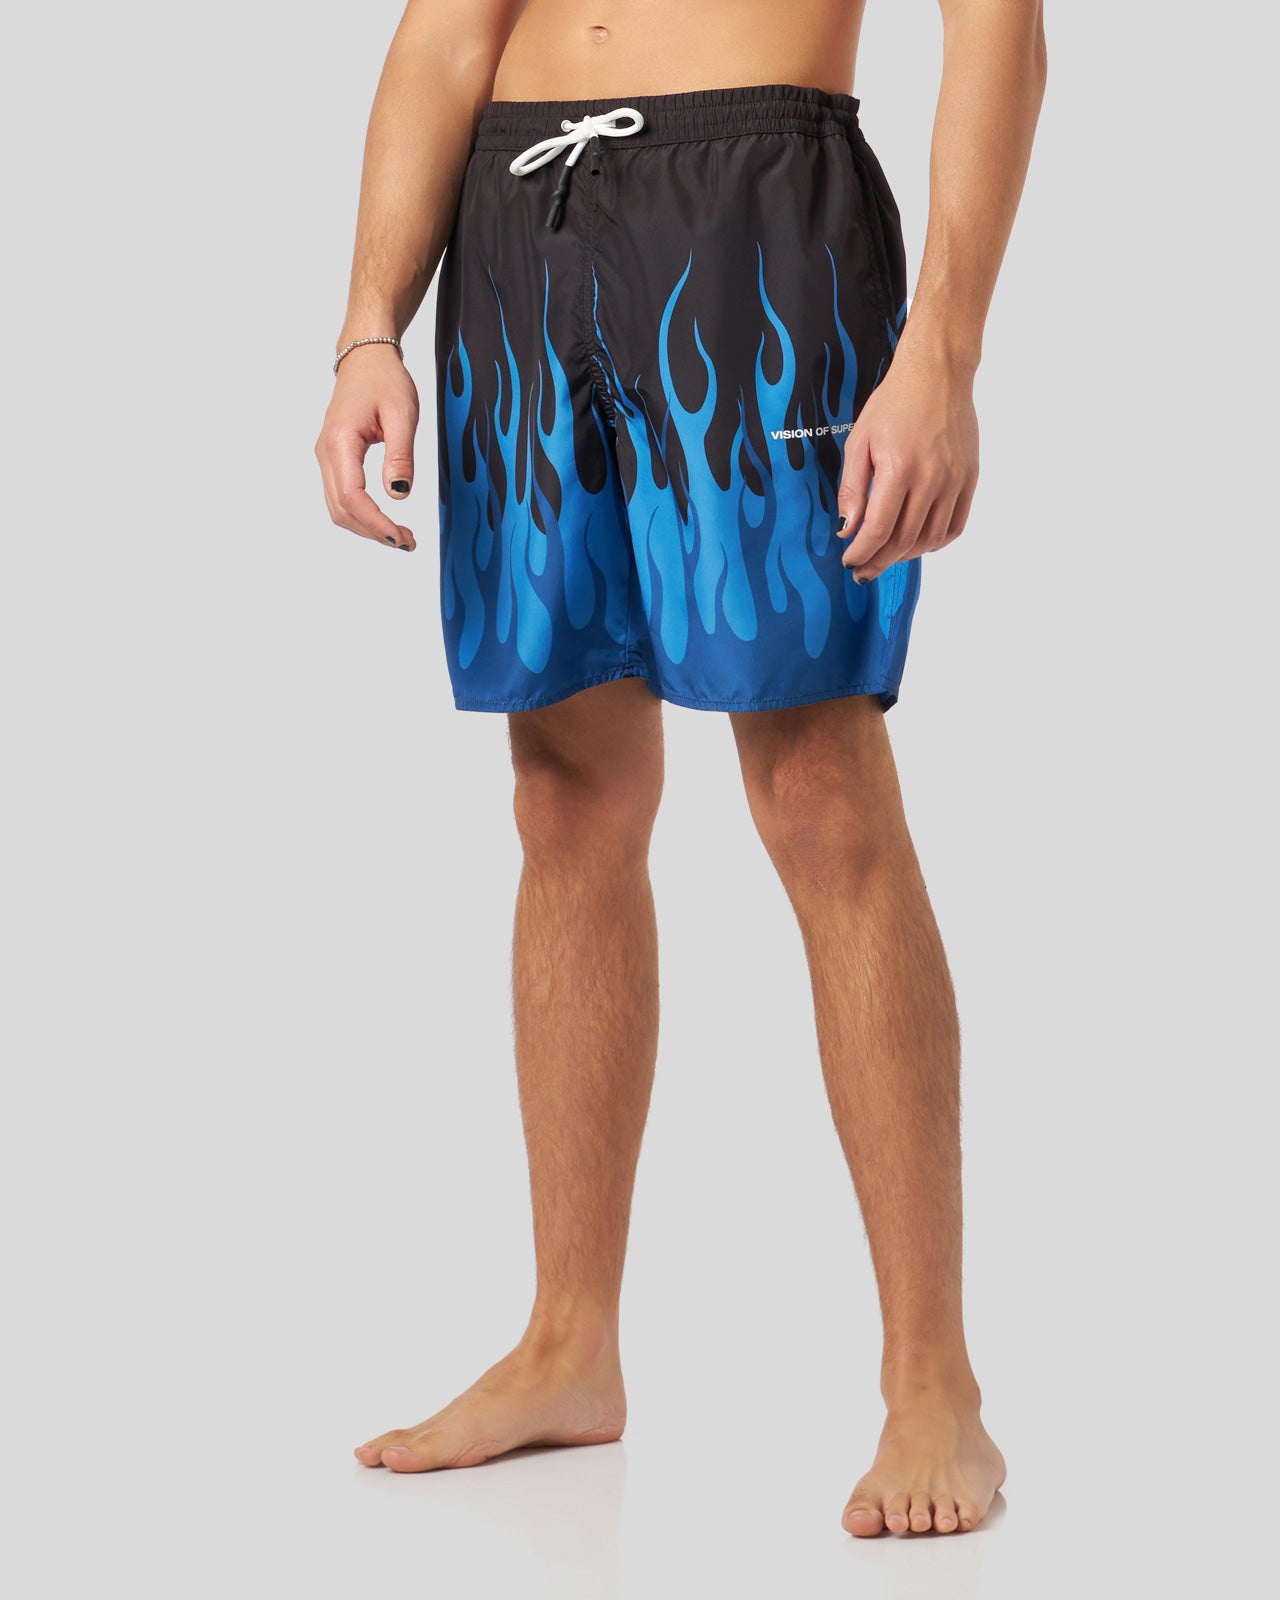 BLACK SWIMWEAR WITH DOUBLE BLUE FLAMES